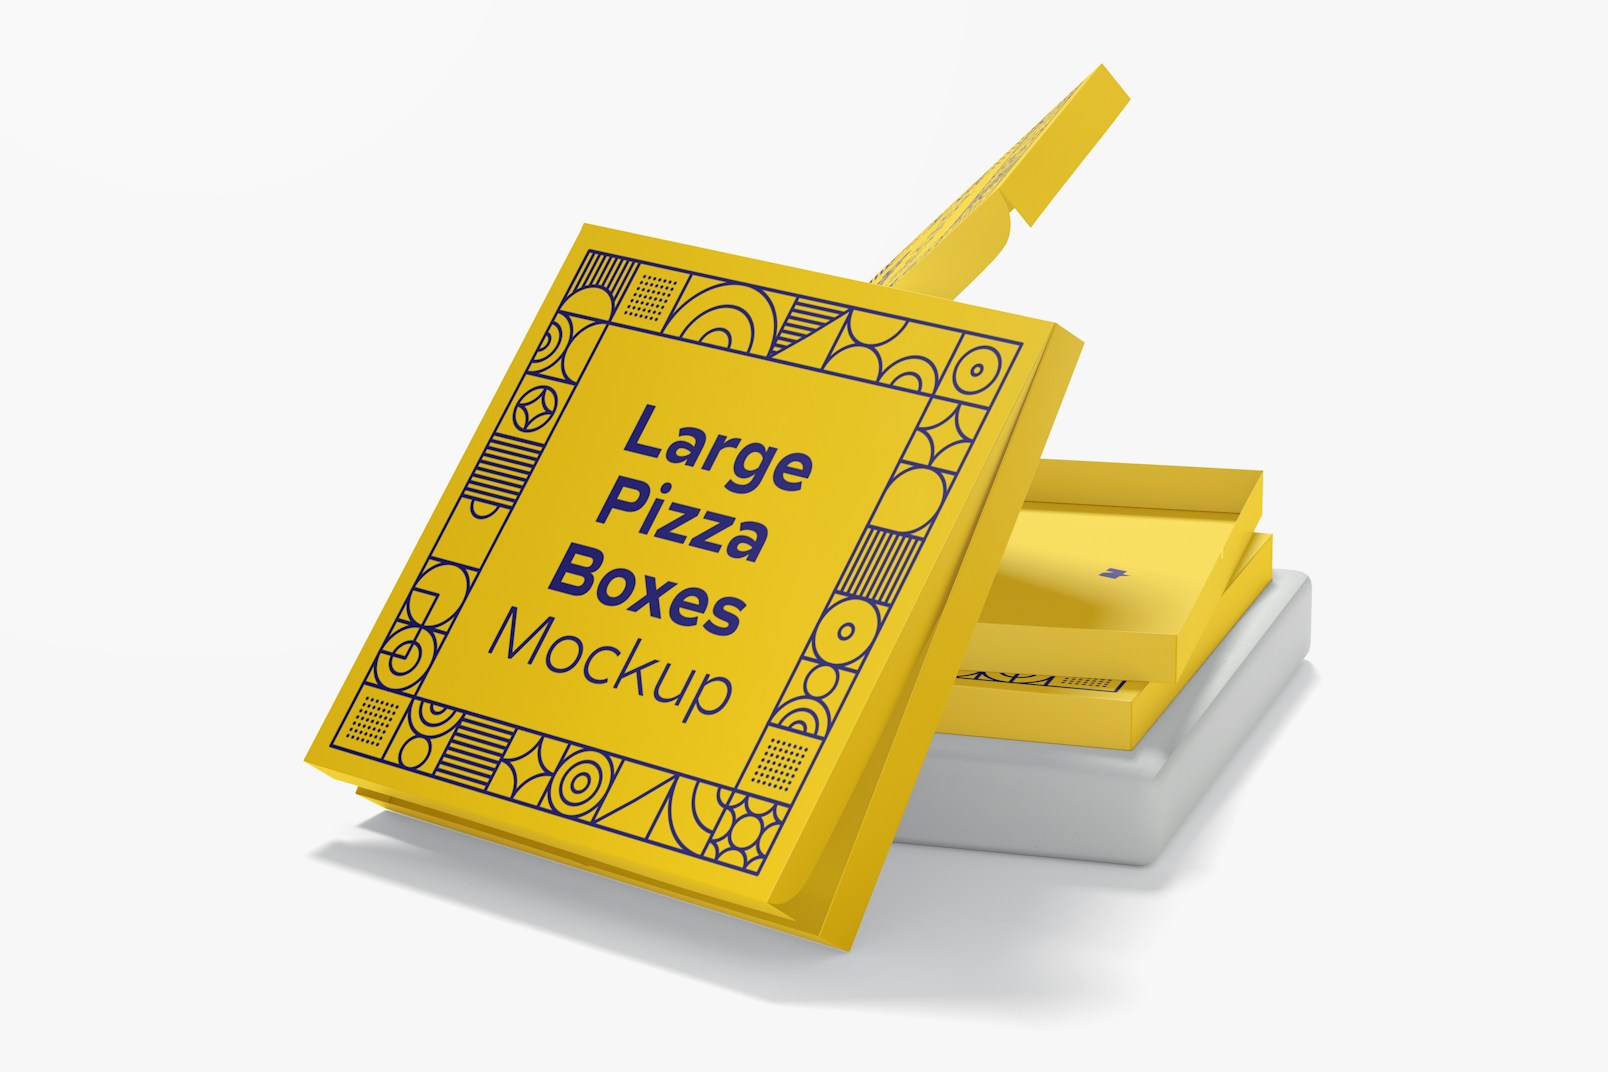 Large Pizza Boxes Mockup, Stacked